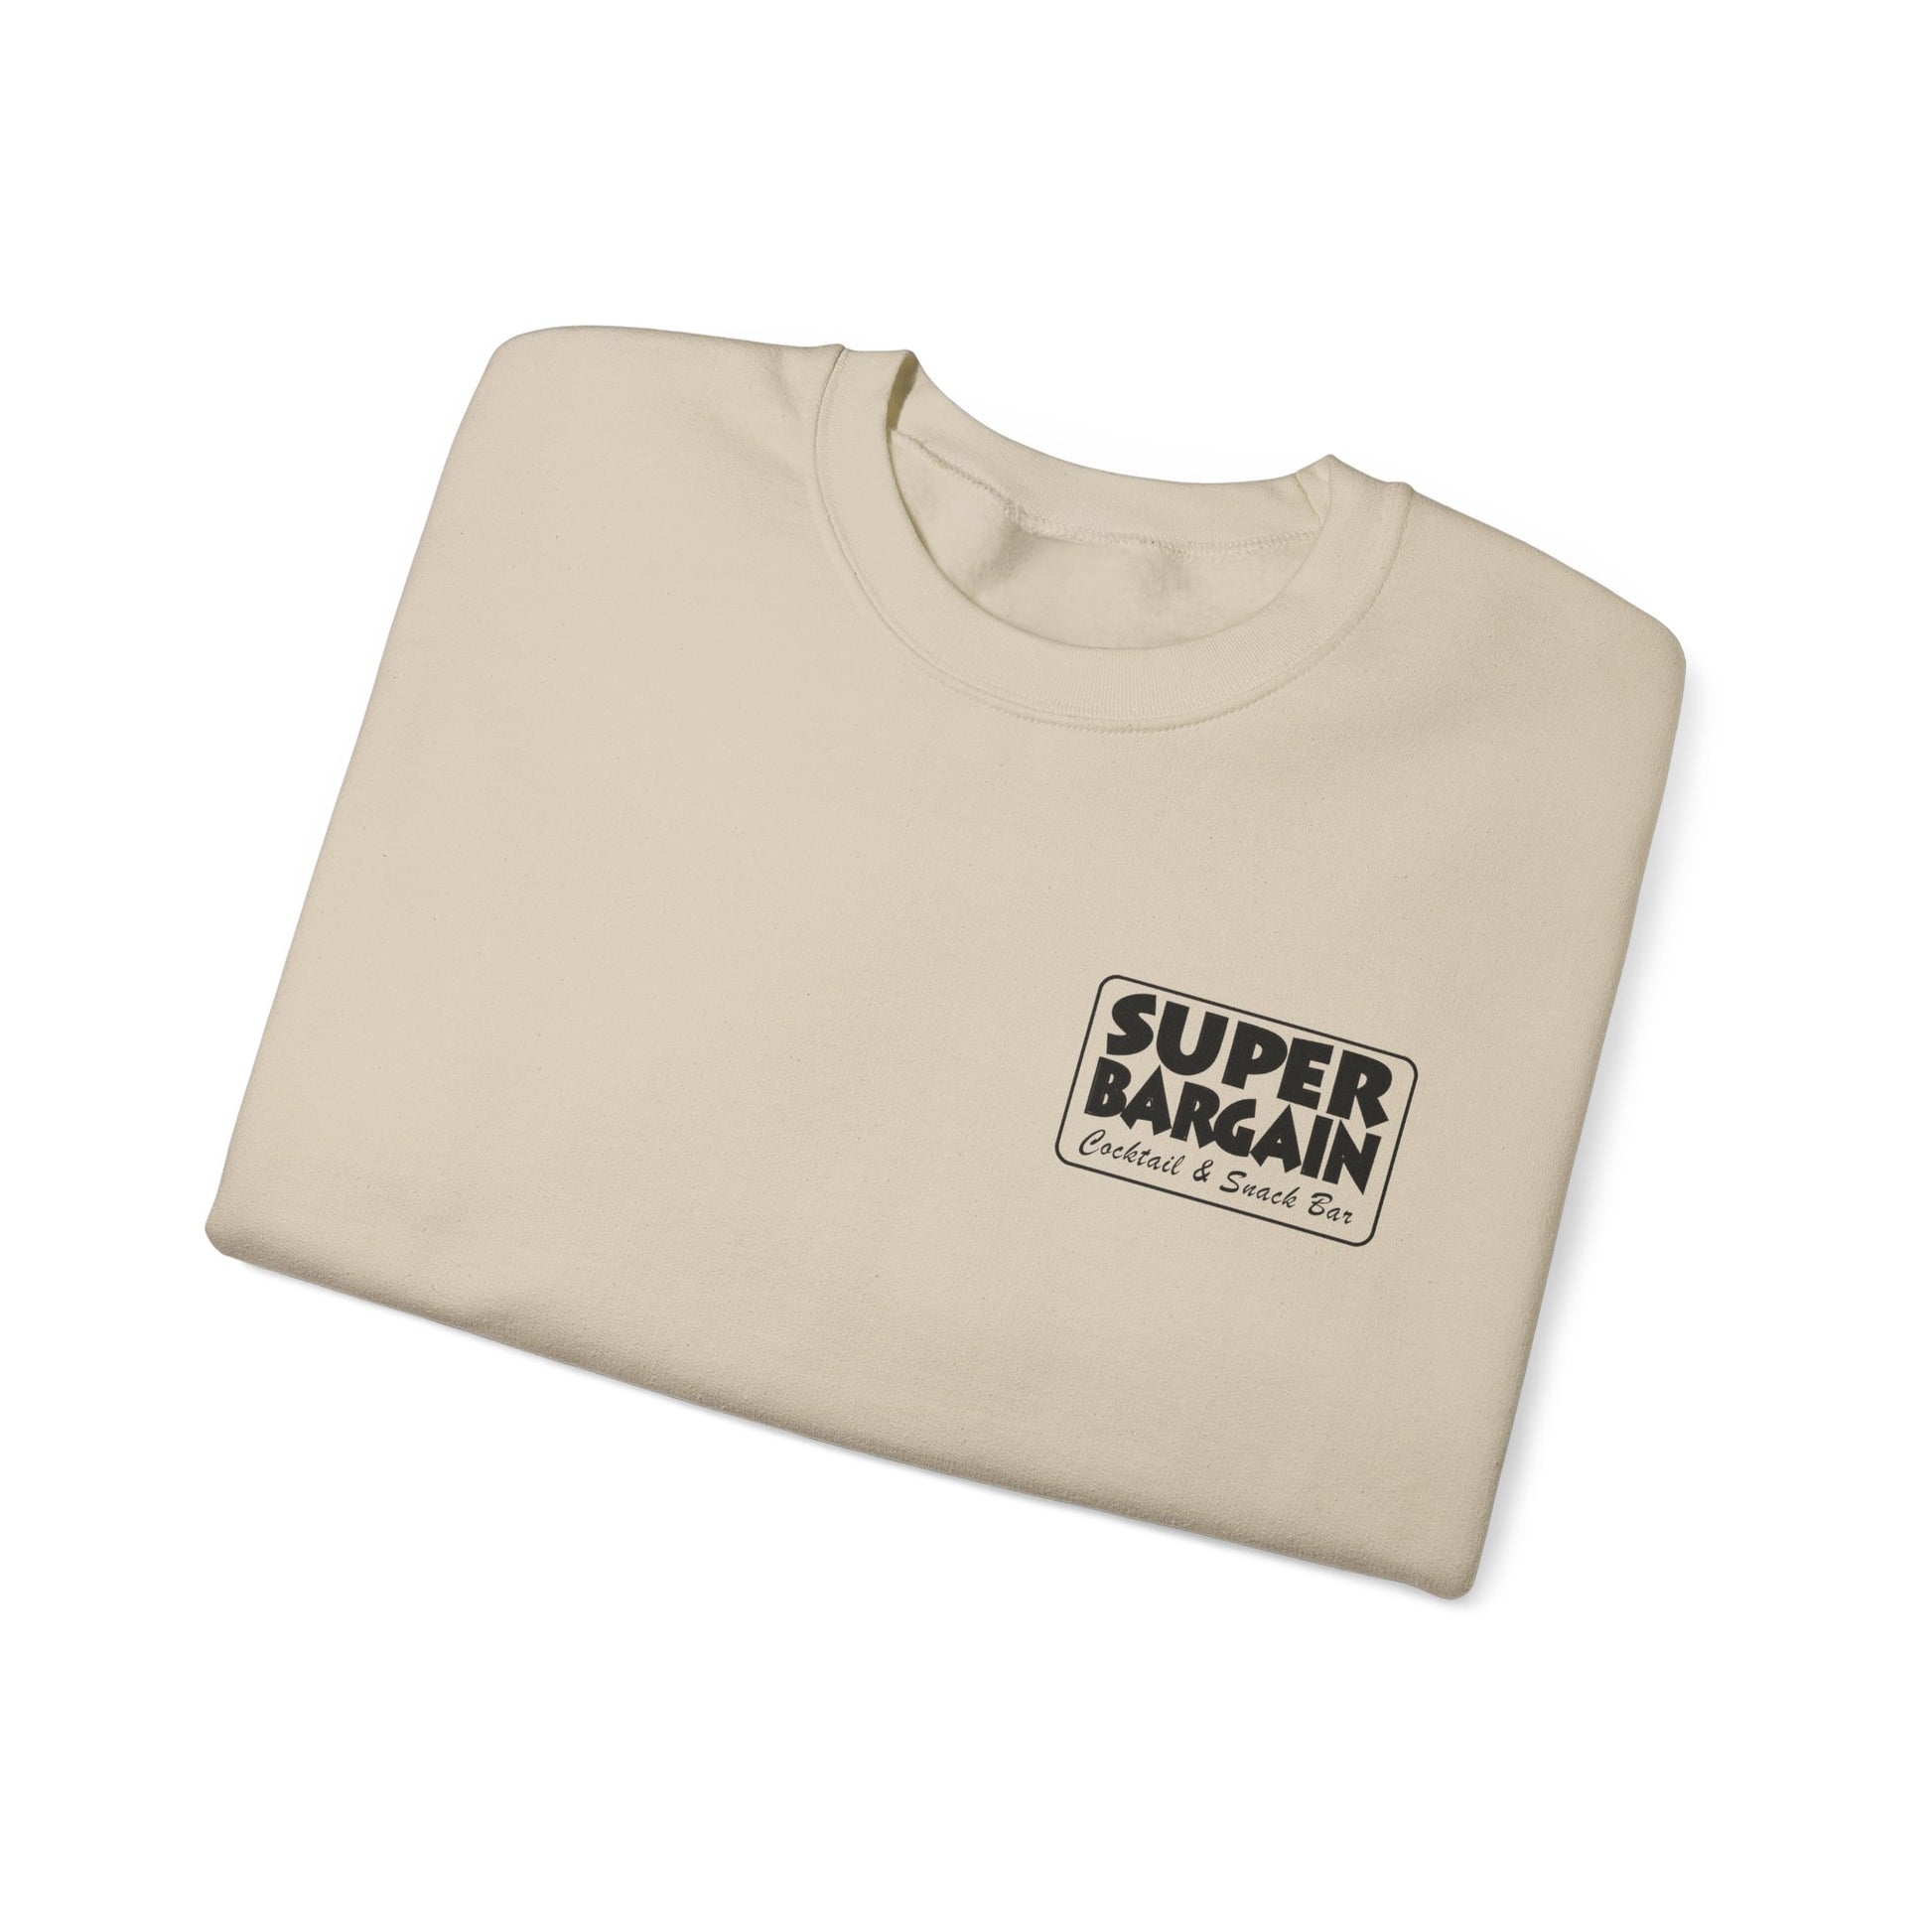 A folded beige Unisex Heavy Blend™ Crewneck Monochrome Logo and Cabbagetown Sweatshirt with a black logo on the chest that reads "Super Bargain" with the tagline "Goodies & Great Buys in Cabbagetown." The shirt is displayed on a white background.